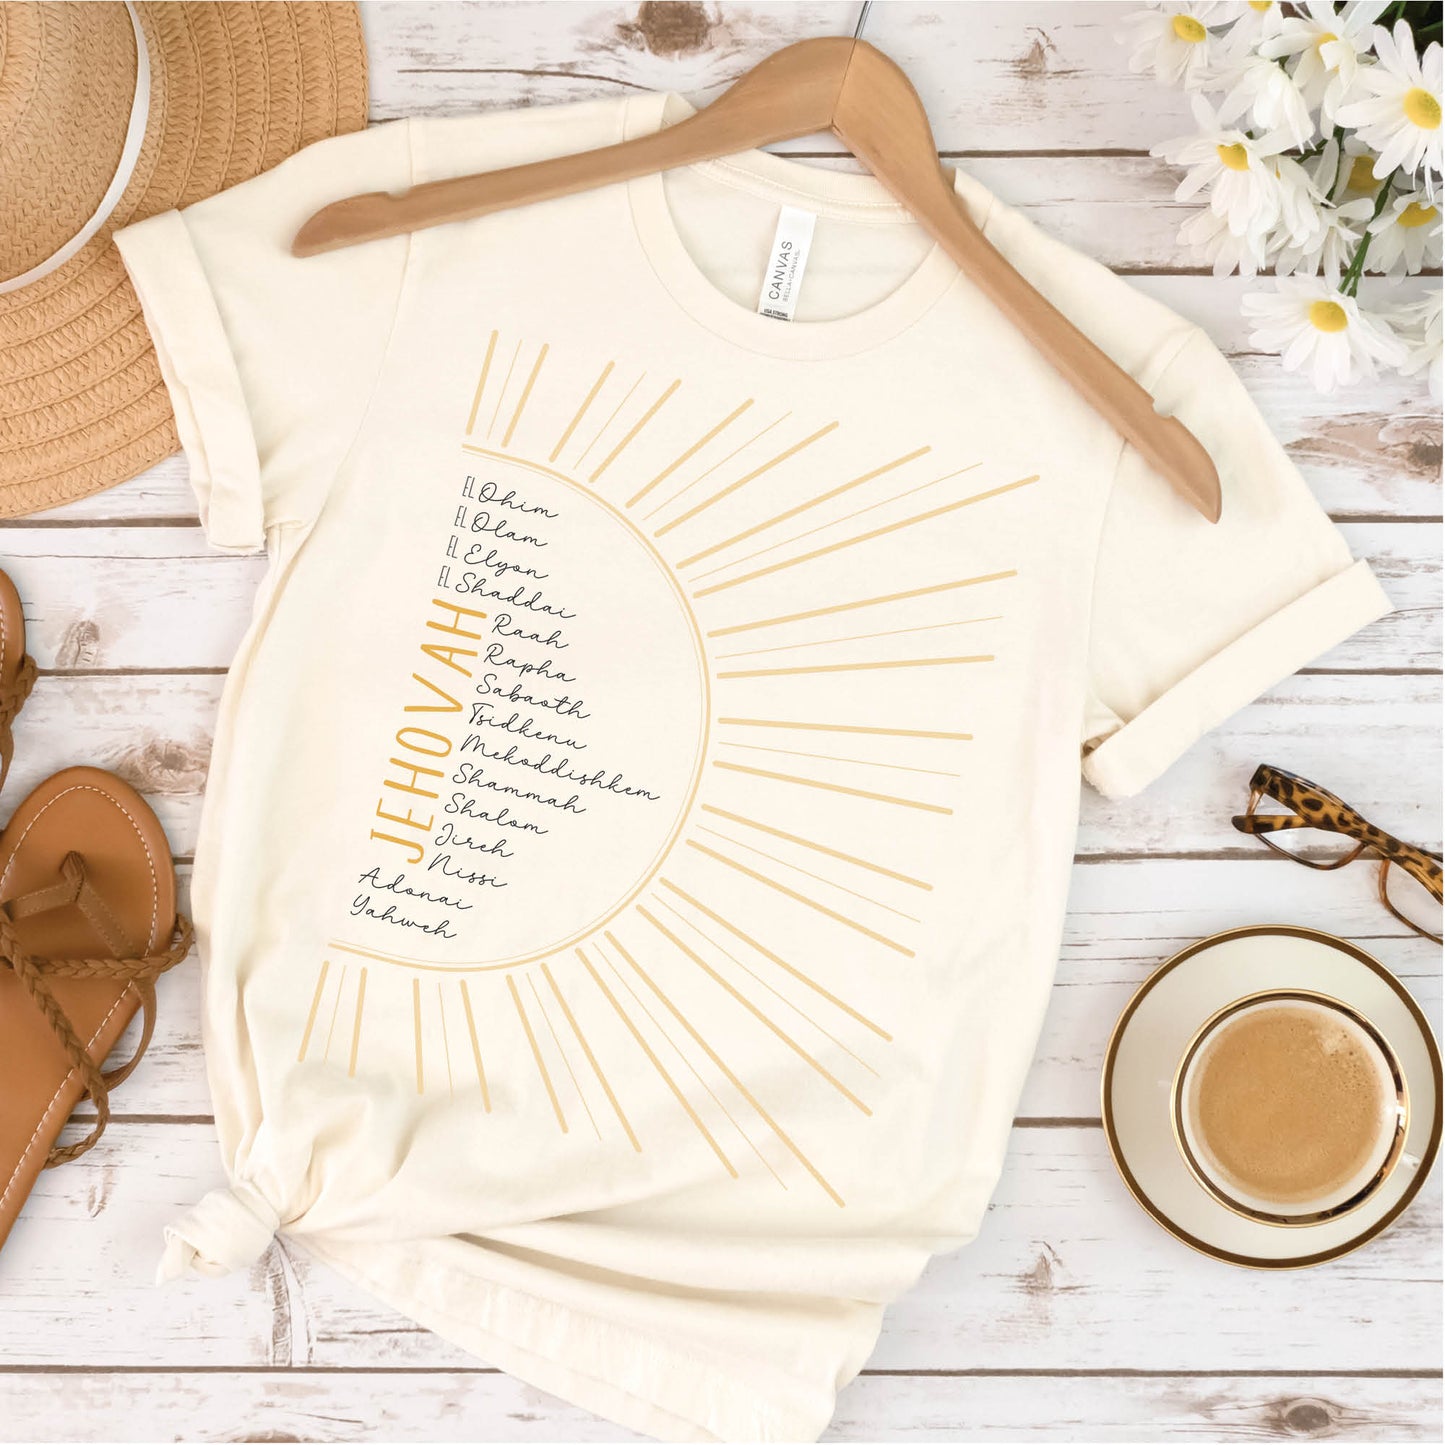 The Names of God Hebrew Christian Old Testament Bible List Sunshine T-Shirt, printed in gold and black on soft cream Bella-Canvas 3001 t-shirt, women's soft unisex fit regular and plus size tee